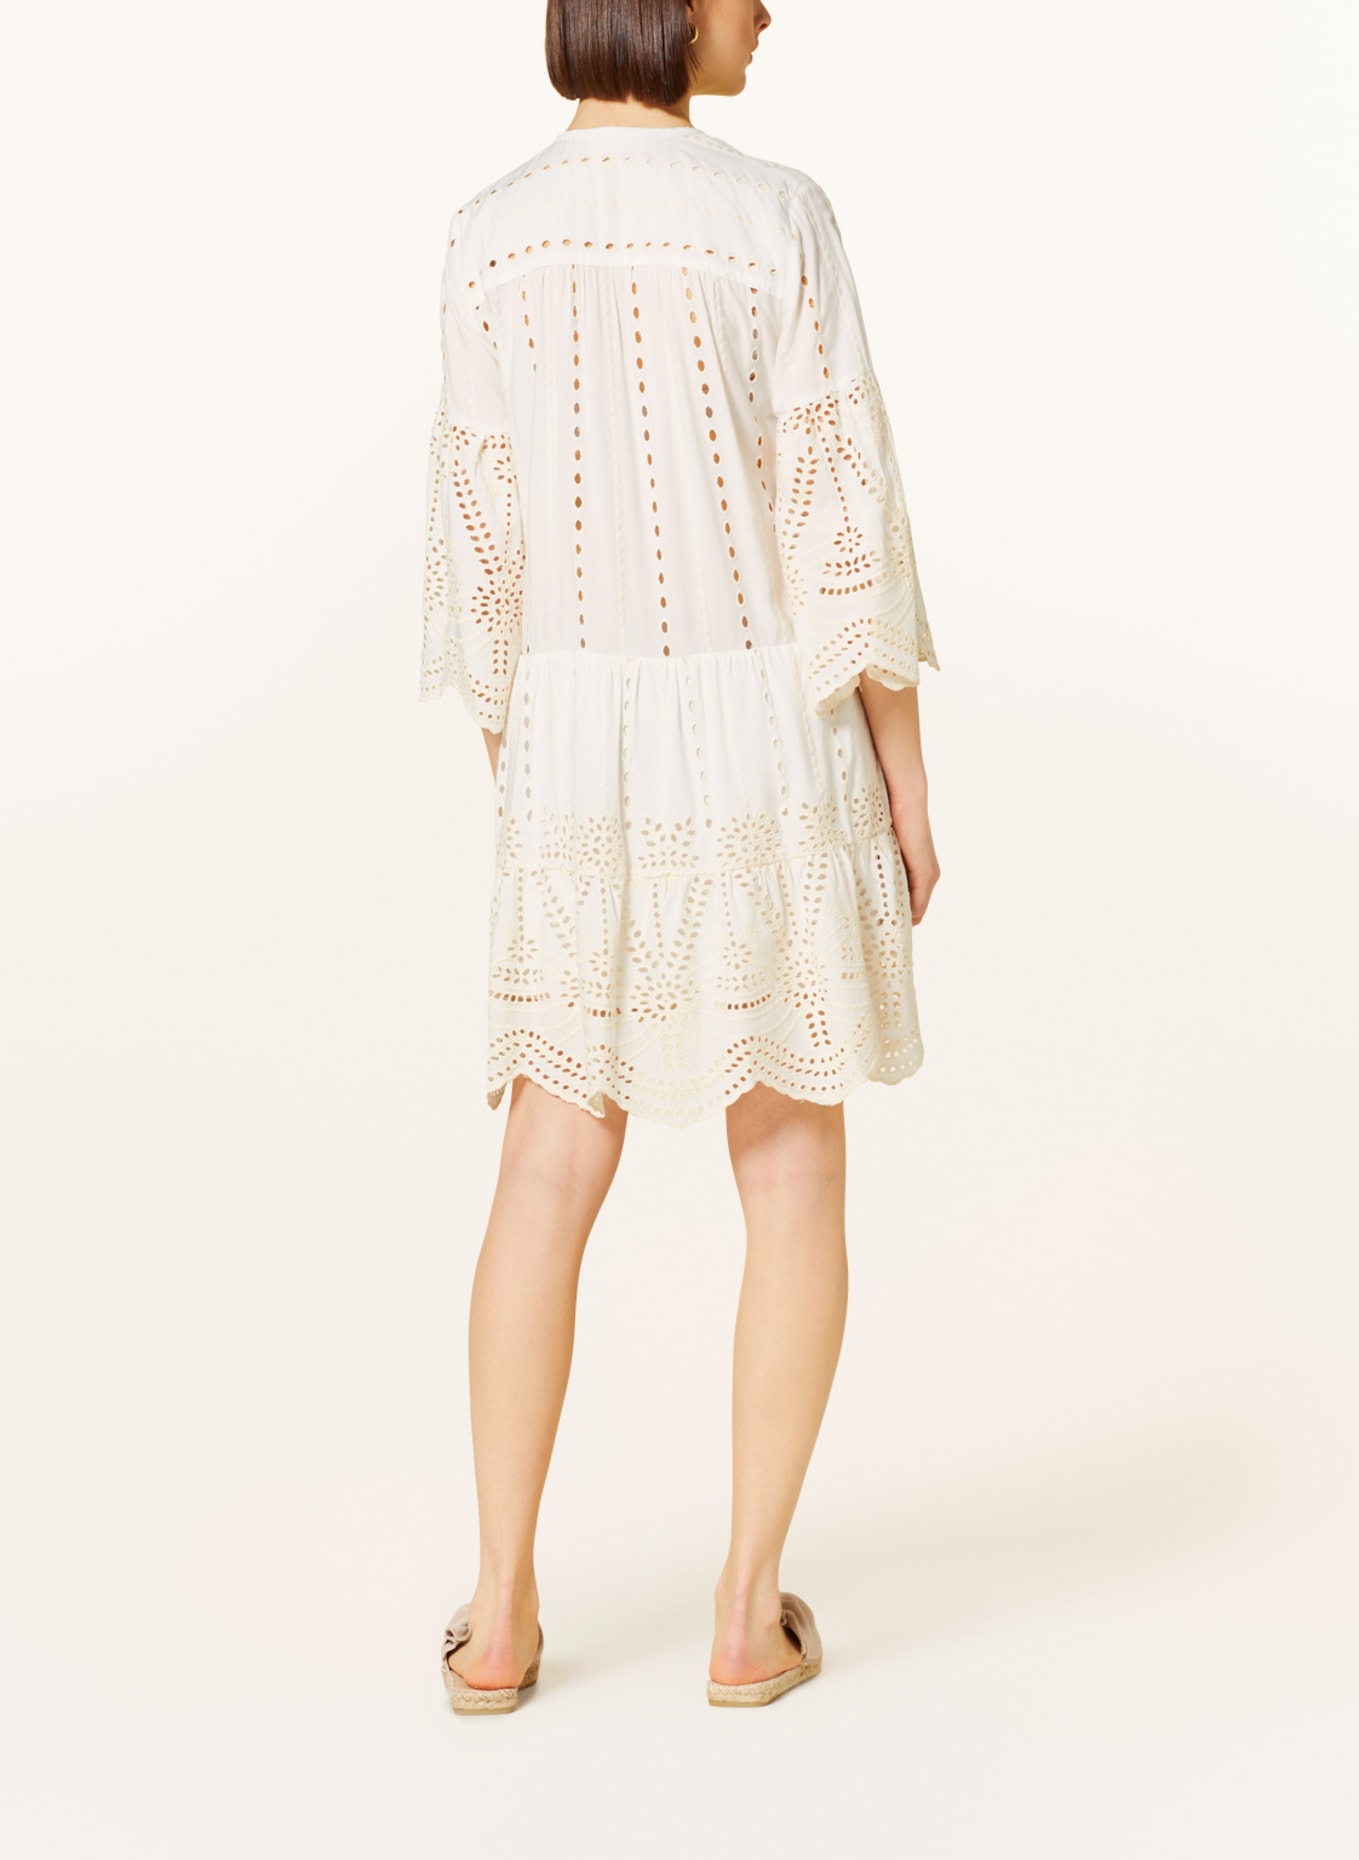 VALÉRIE KHALFON Dress RIVA with 3/4 sleeves and broderie anglaise, Color: ECRU (Image 3)